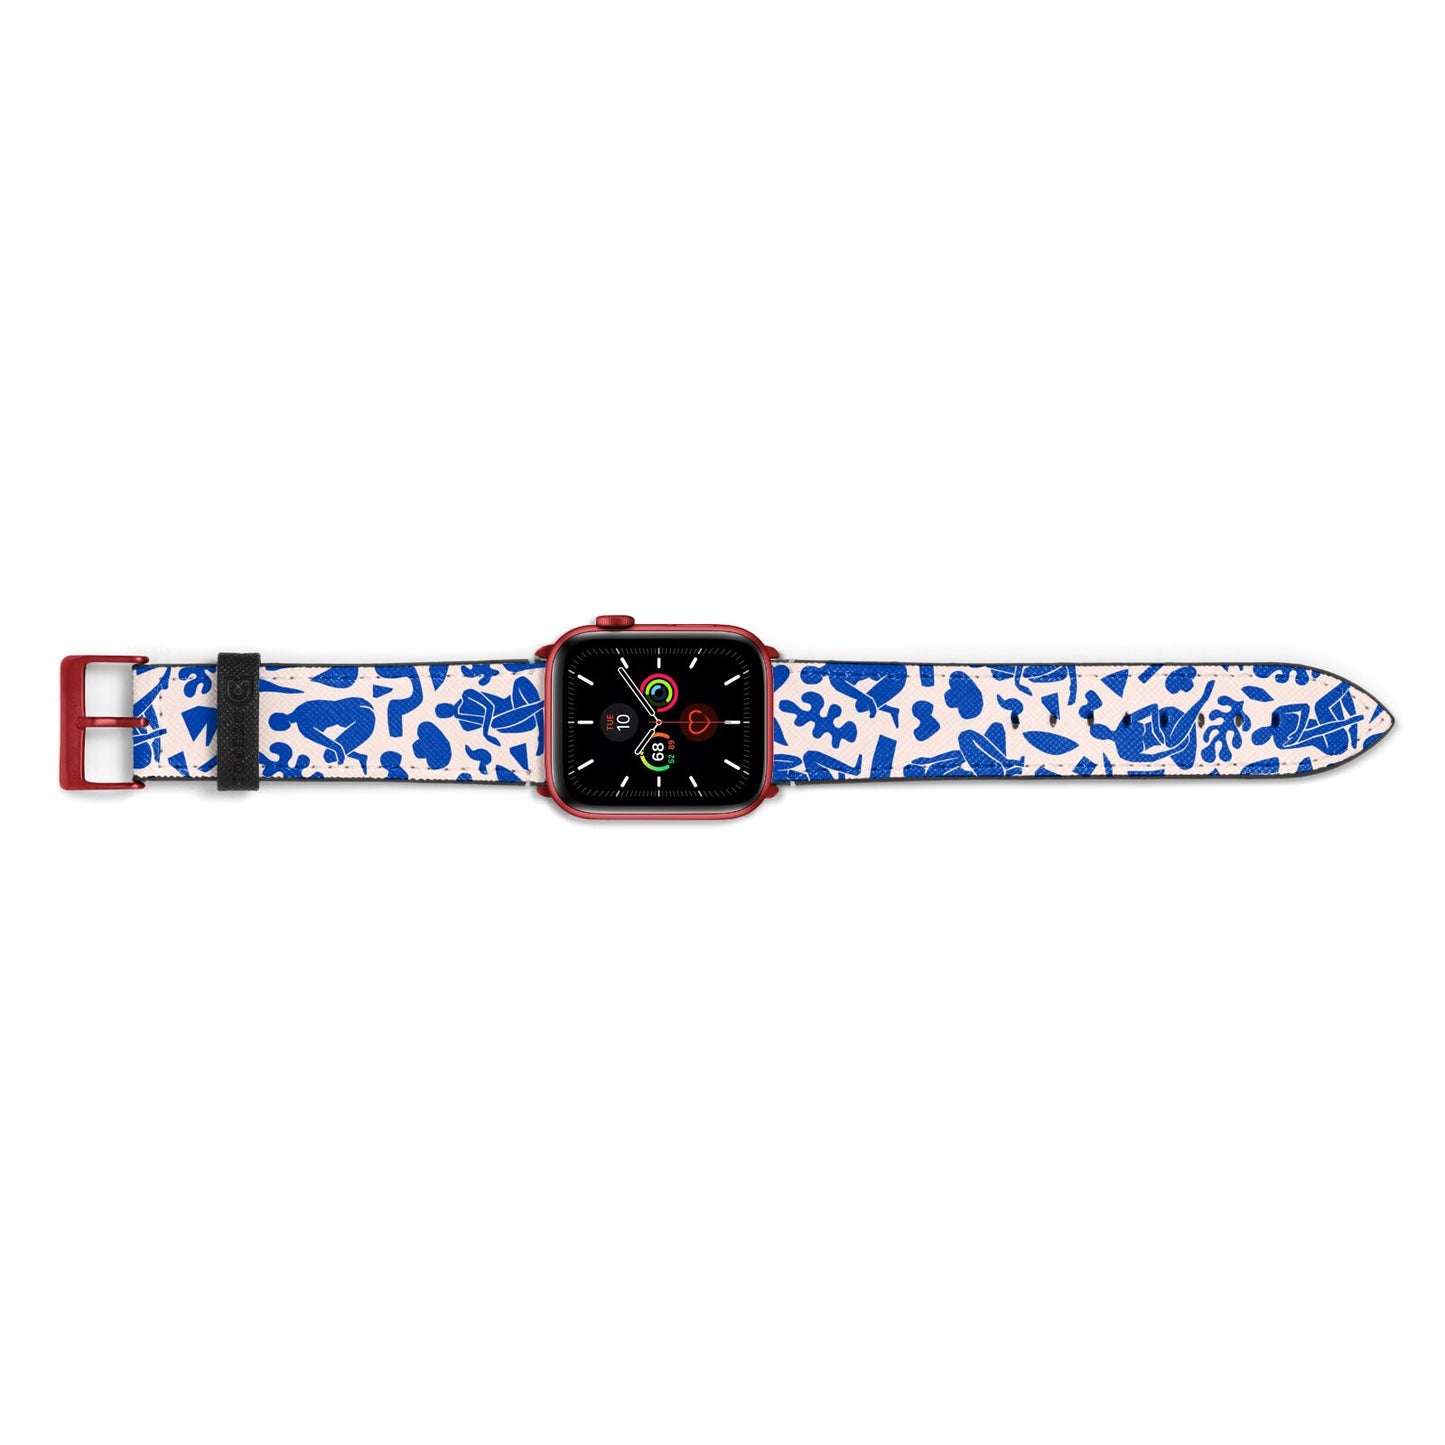 Abstract Art Apple Watch Strap Landscape Image Red Hardware